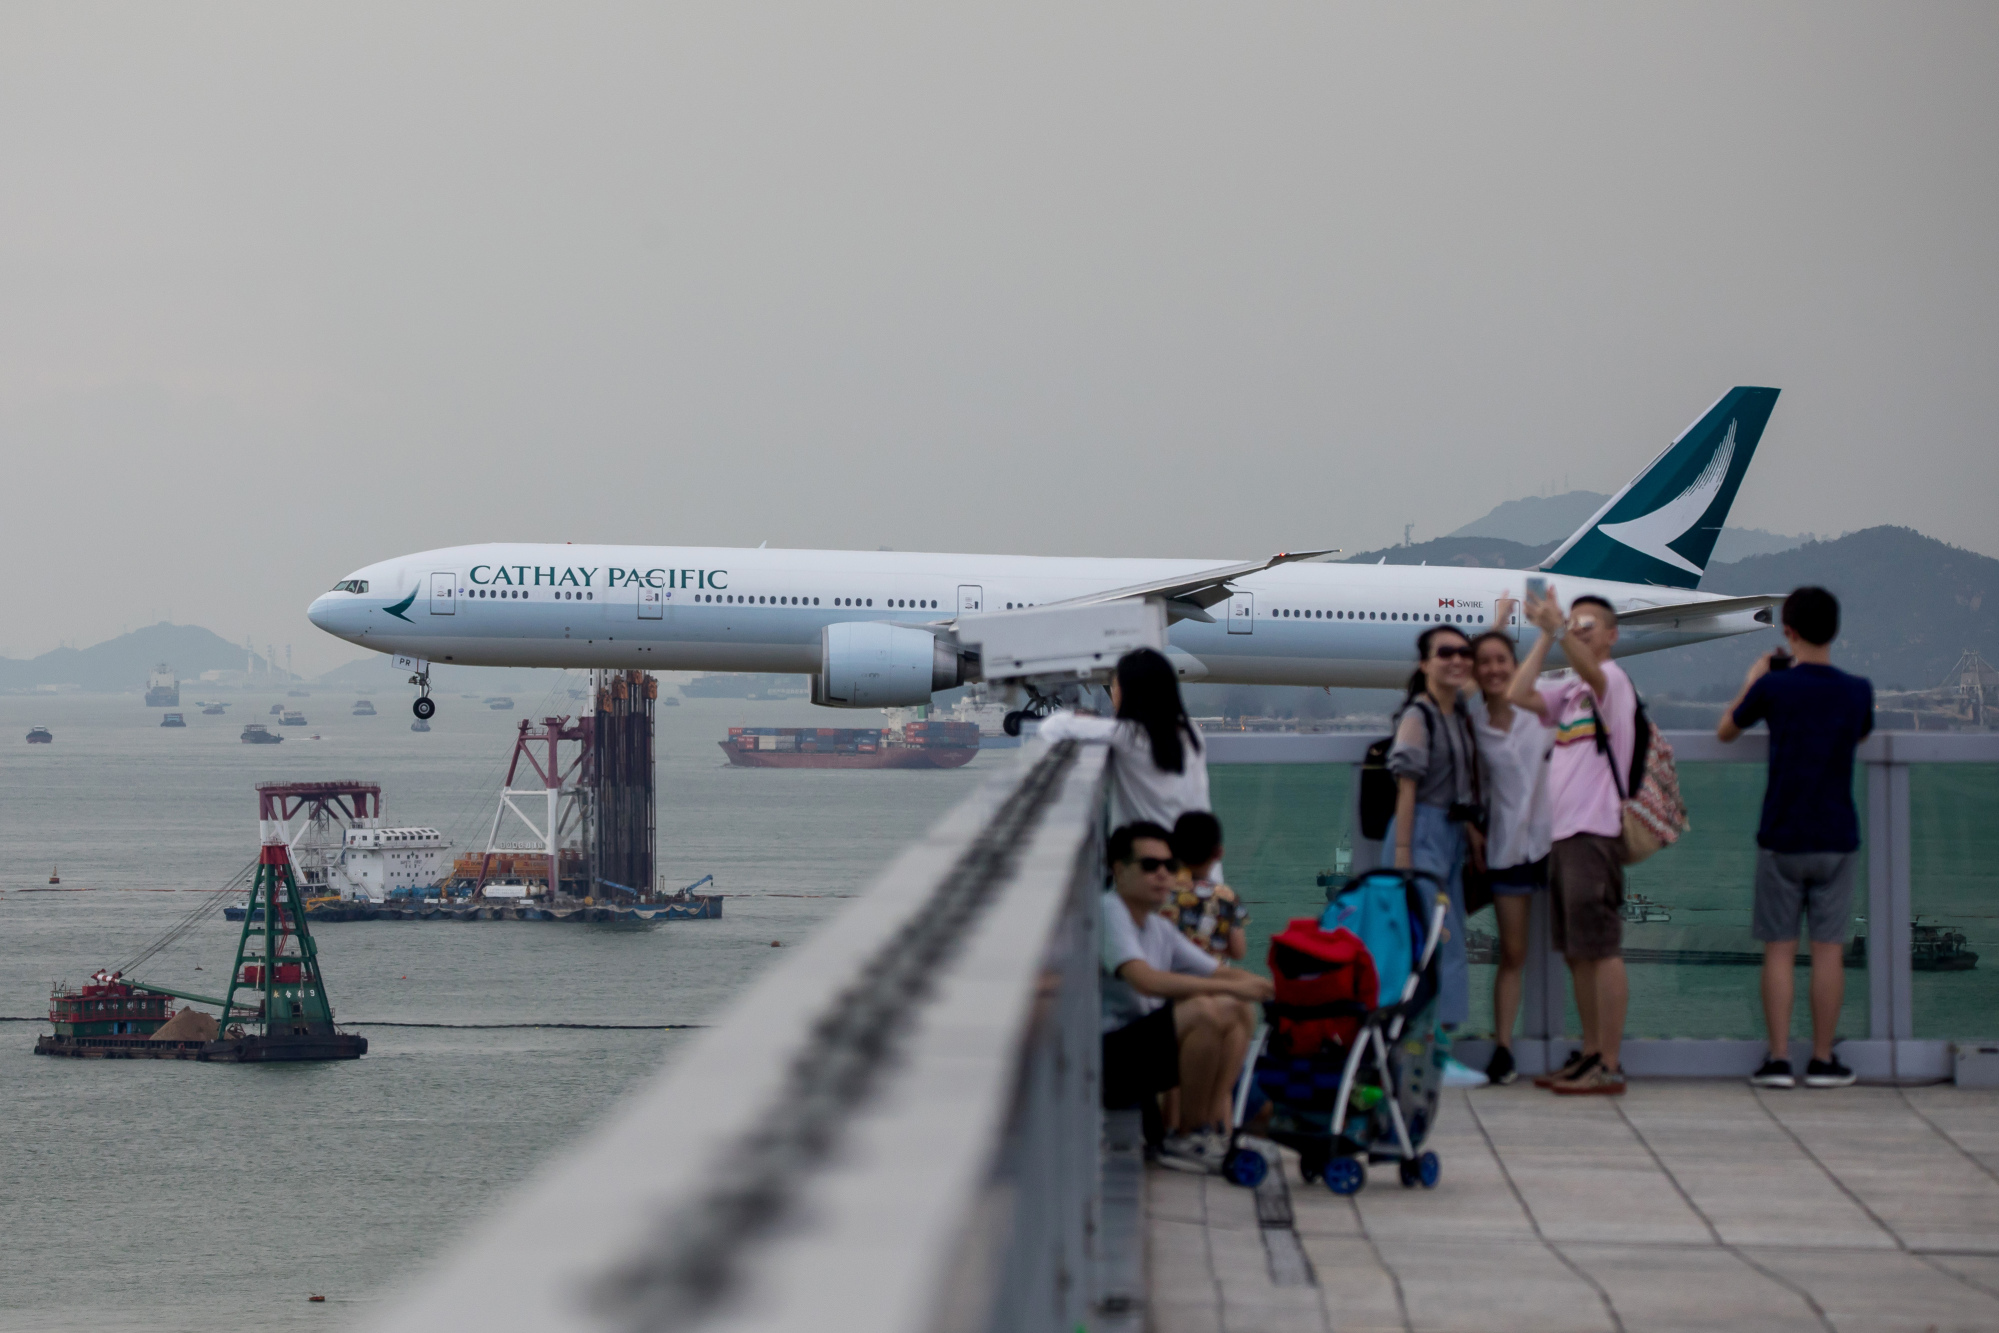 Rising Fuel Cost Dents Cathay Pacific's Effort to Revive Earnings